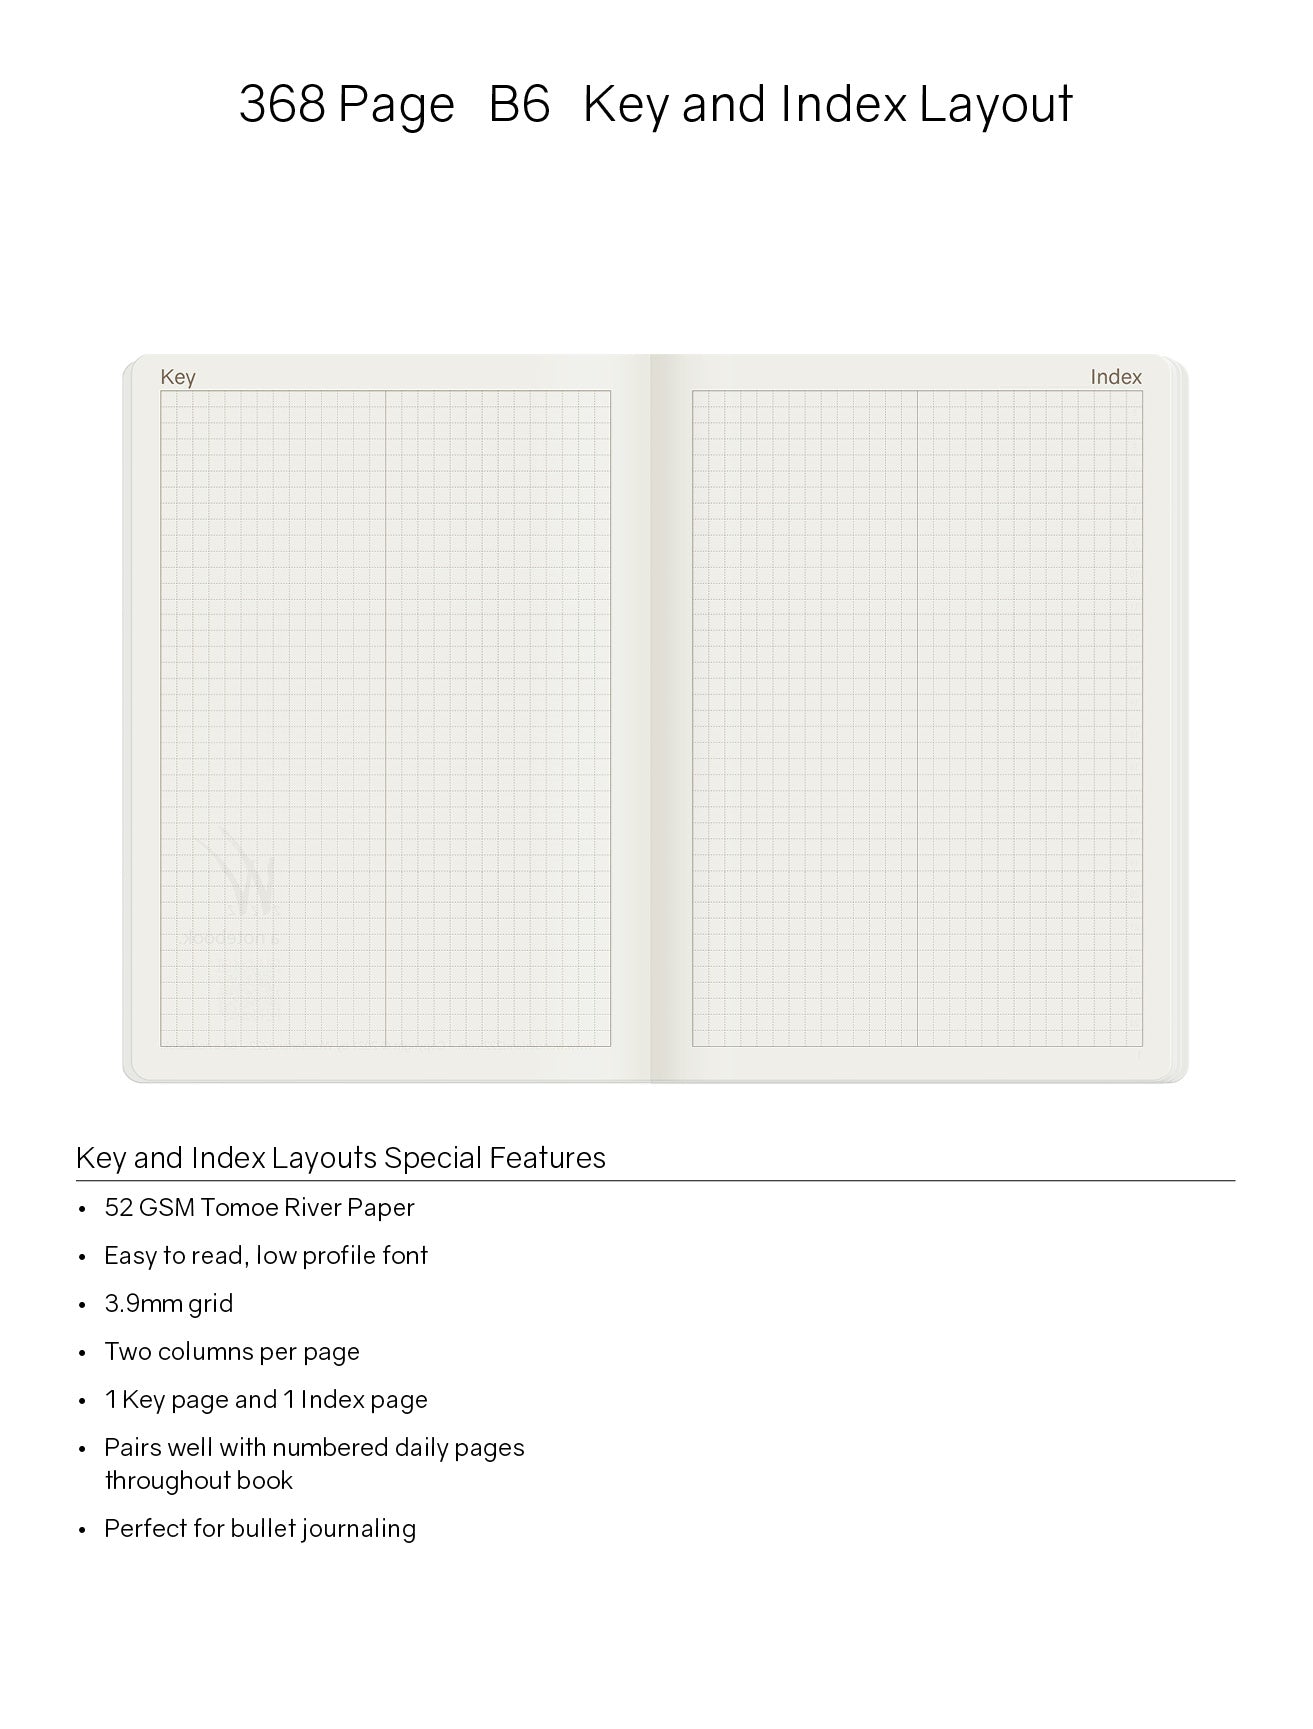 IMPERFECT | B6 Notebook (368 pages) - 2024 Edition